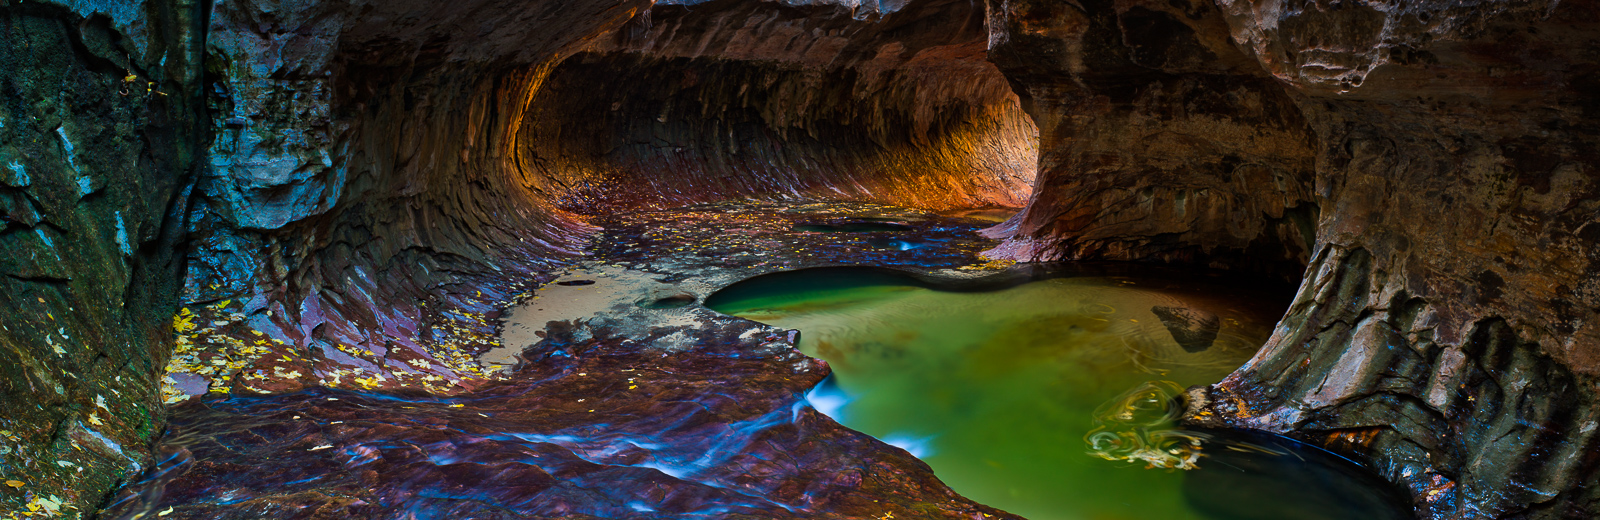 Zion's remote cavern carved into the rock takes in the morning light reflected off the canyon's walls. Magical.